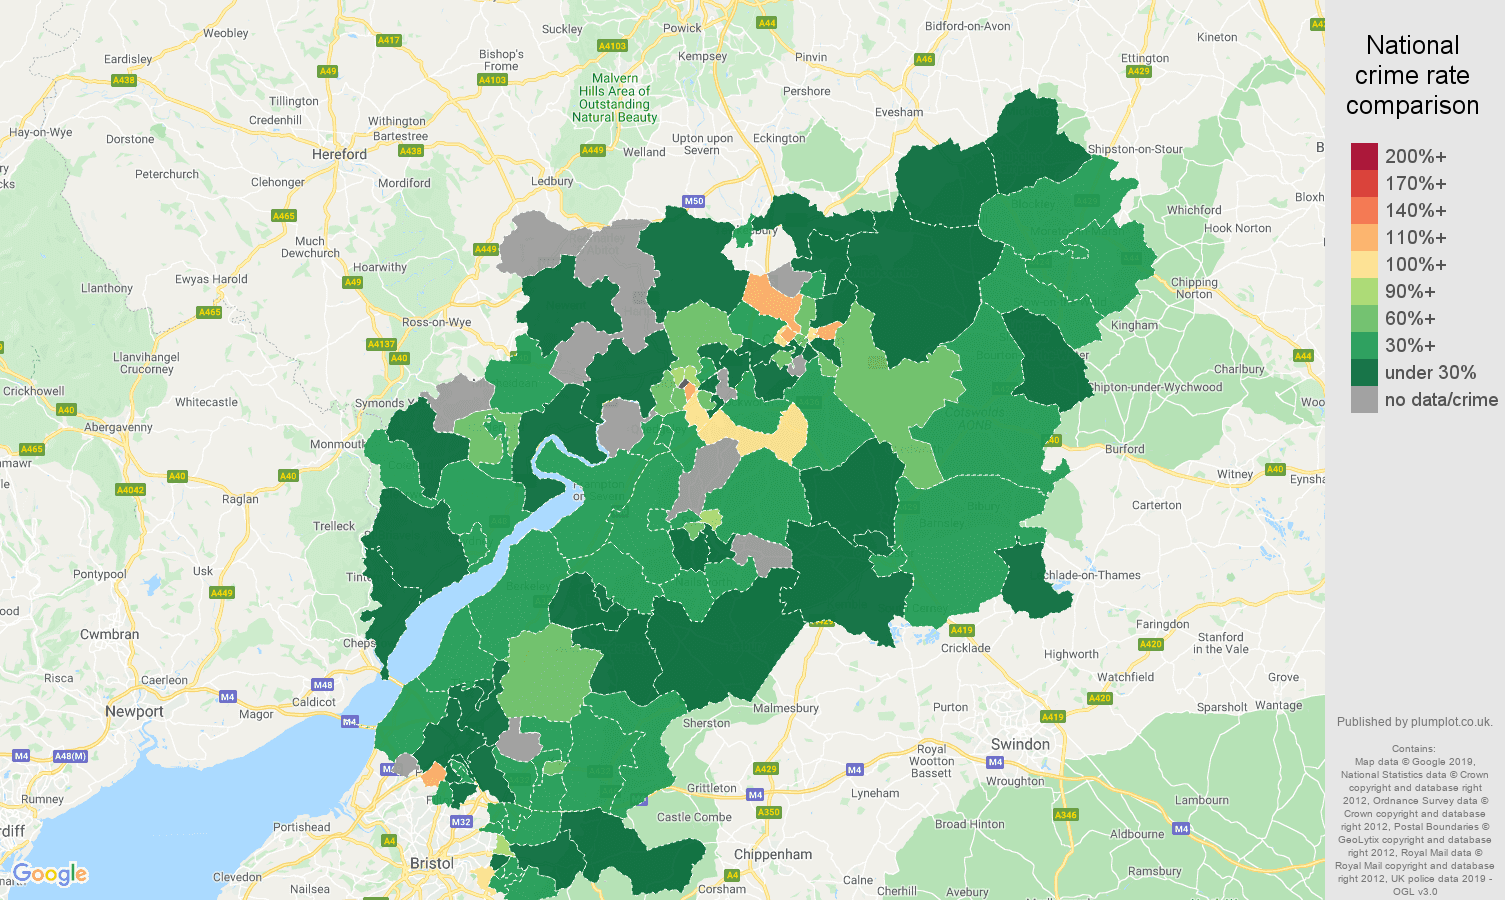 Gloucestershire other crime rate comparison map